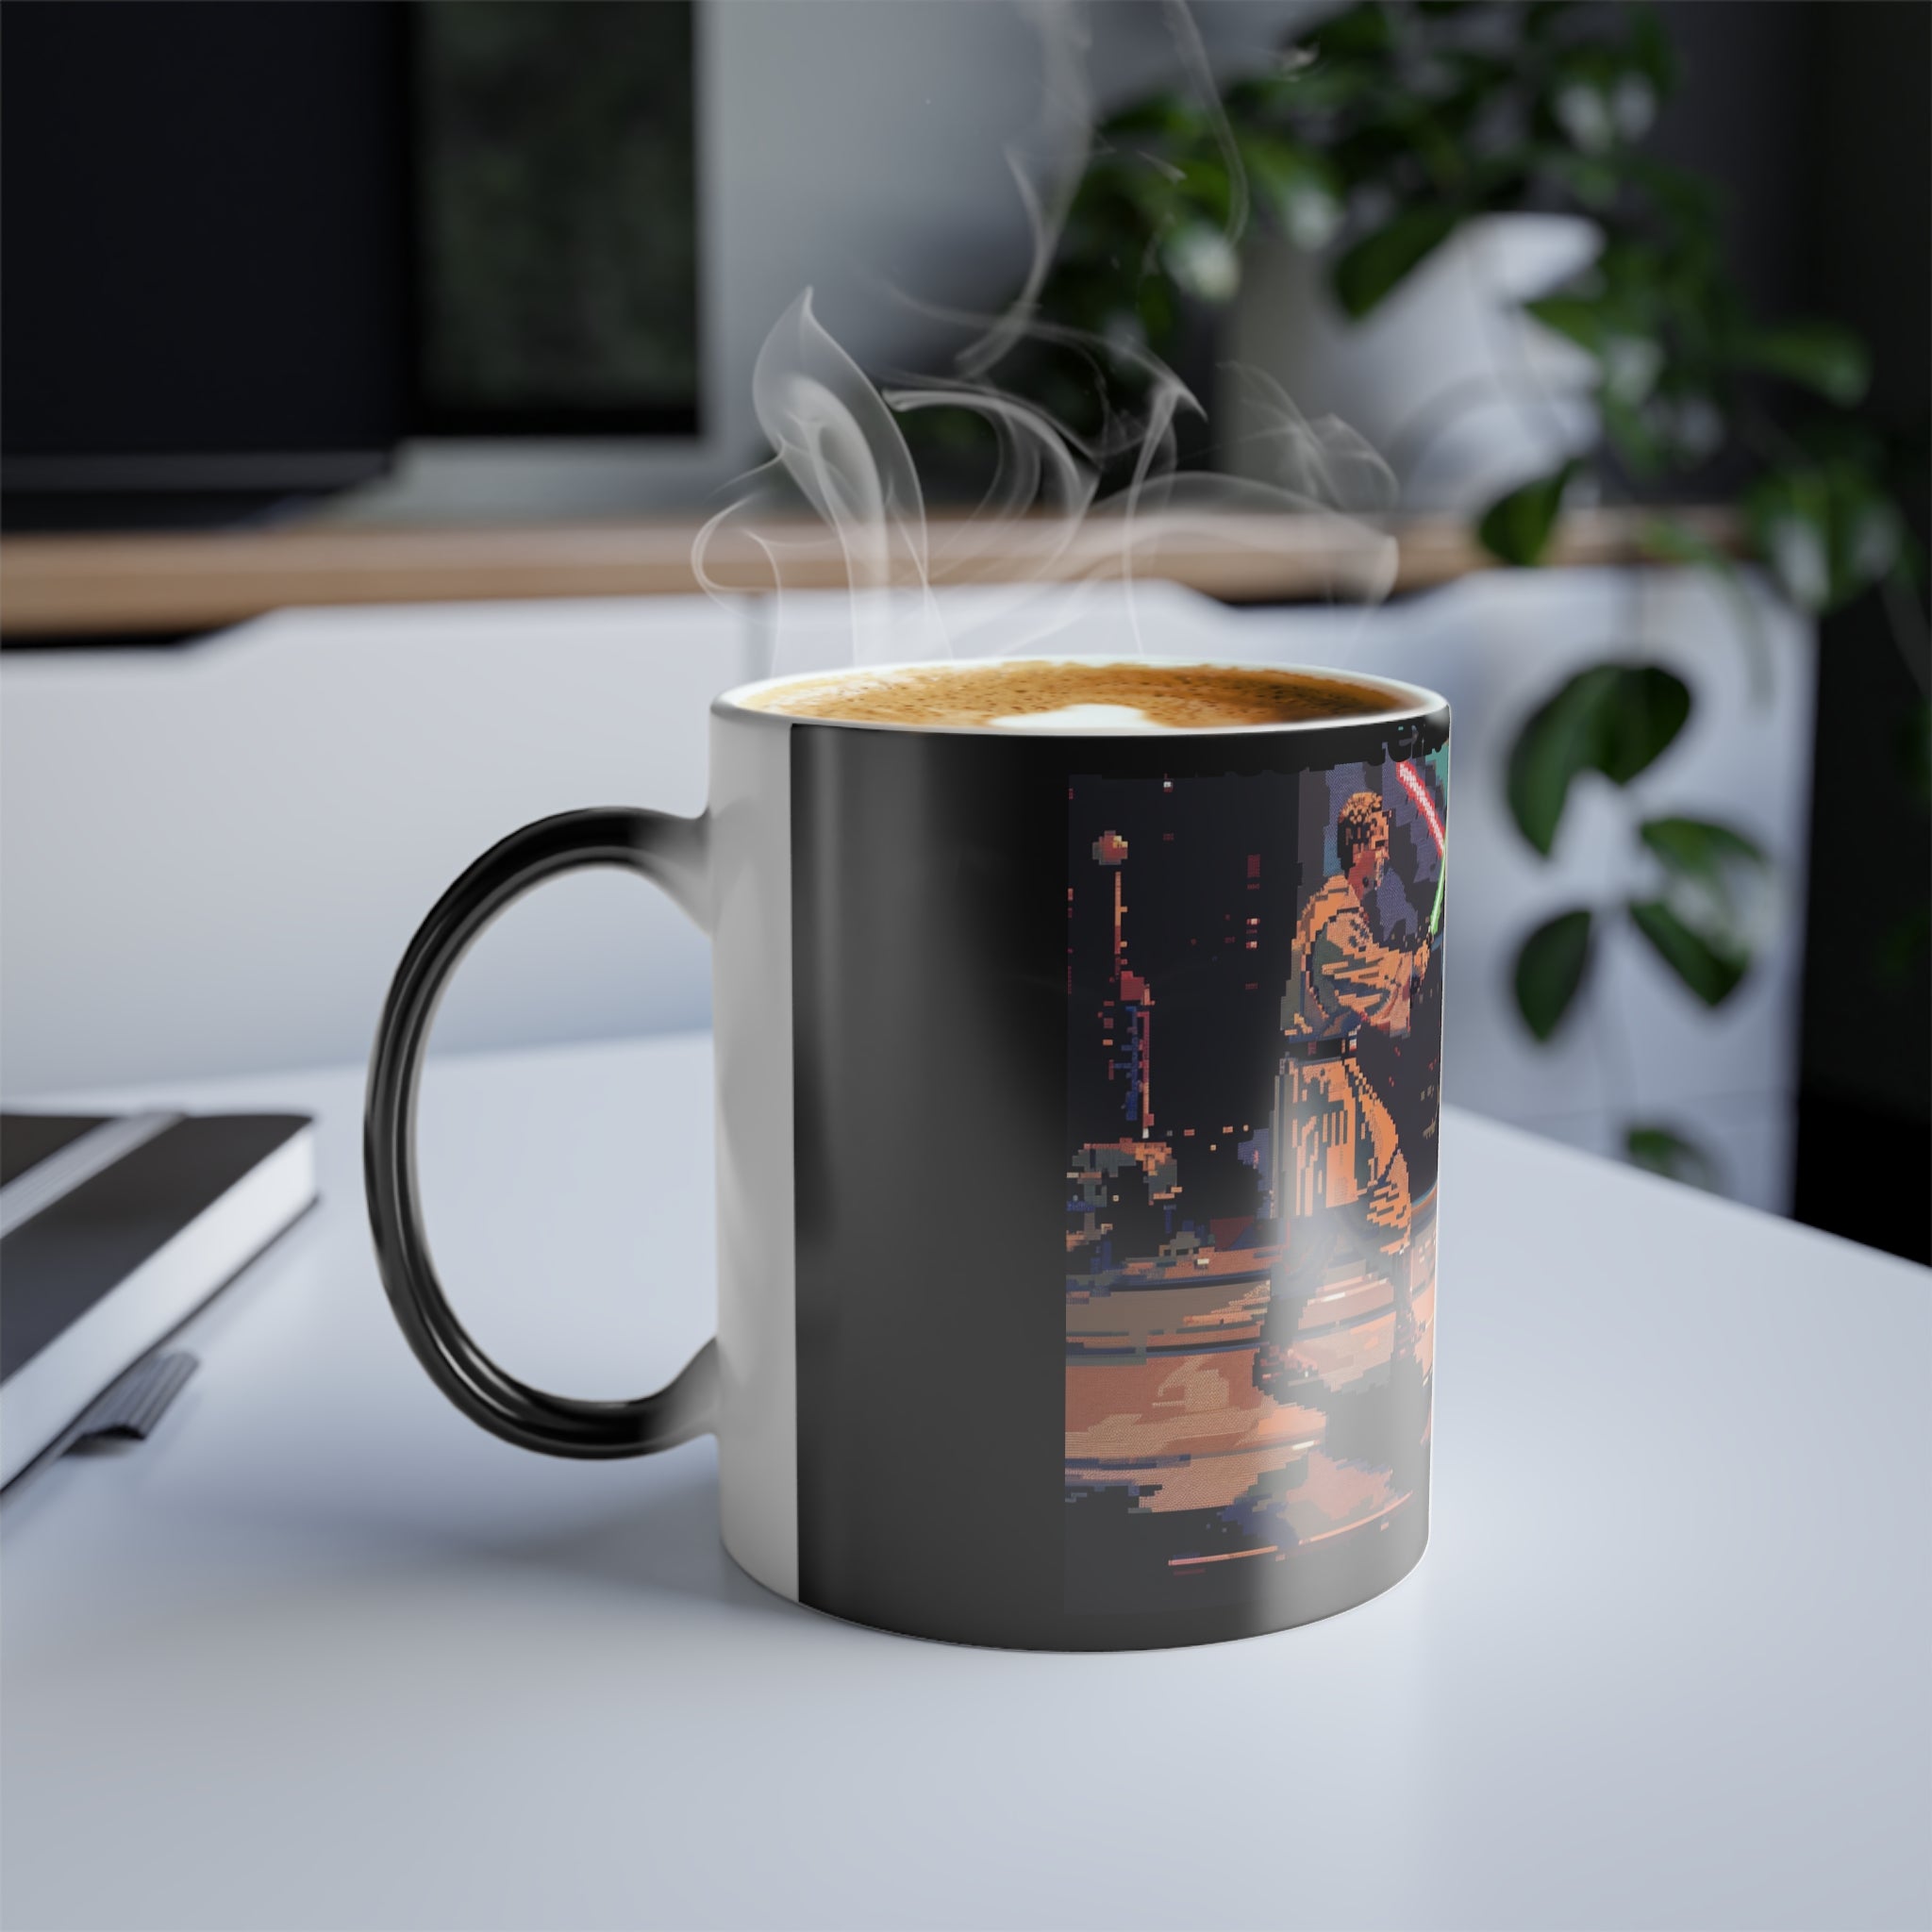 Galactic Betrayal: Order 66 - A Dark Lord's Quest Color Morphing Mug - 11oz 'Journey in a Cup' Inspired by the Infamous Darth